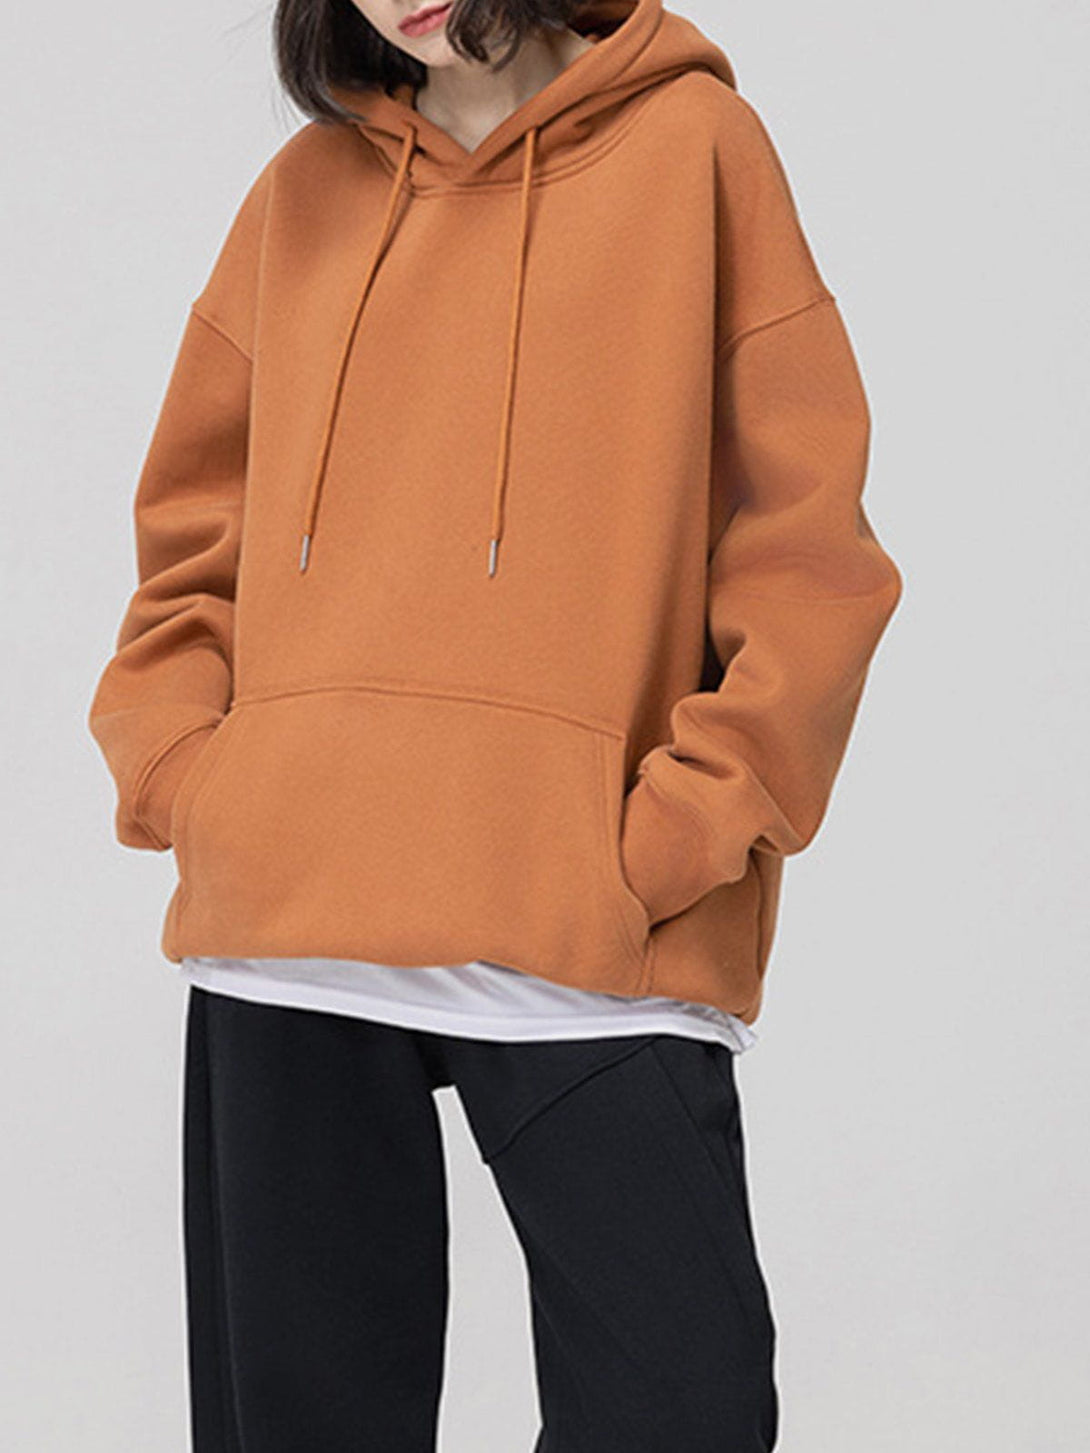 Majesda® - Solid Color Drawstring Hoodie outfit ideas streetwear fashion